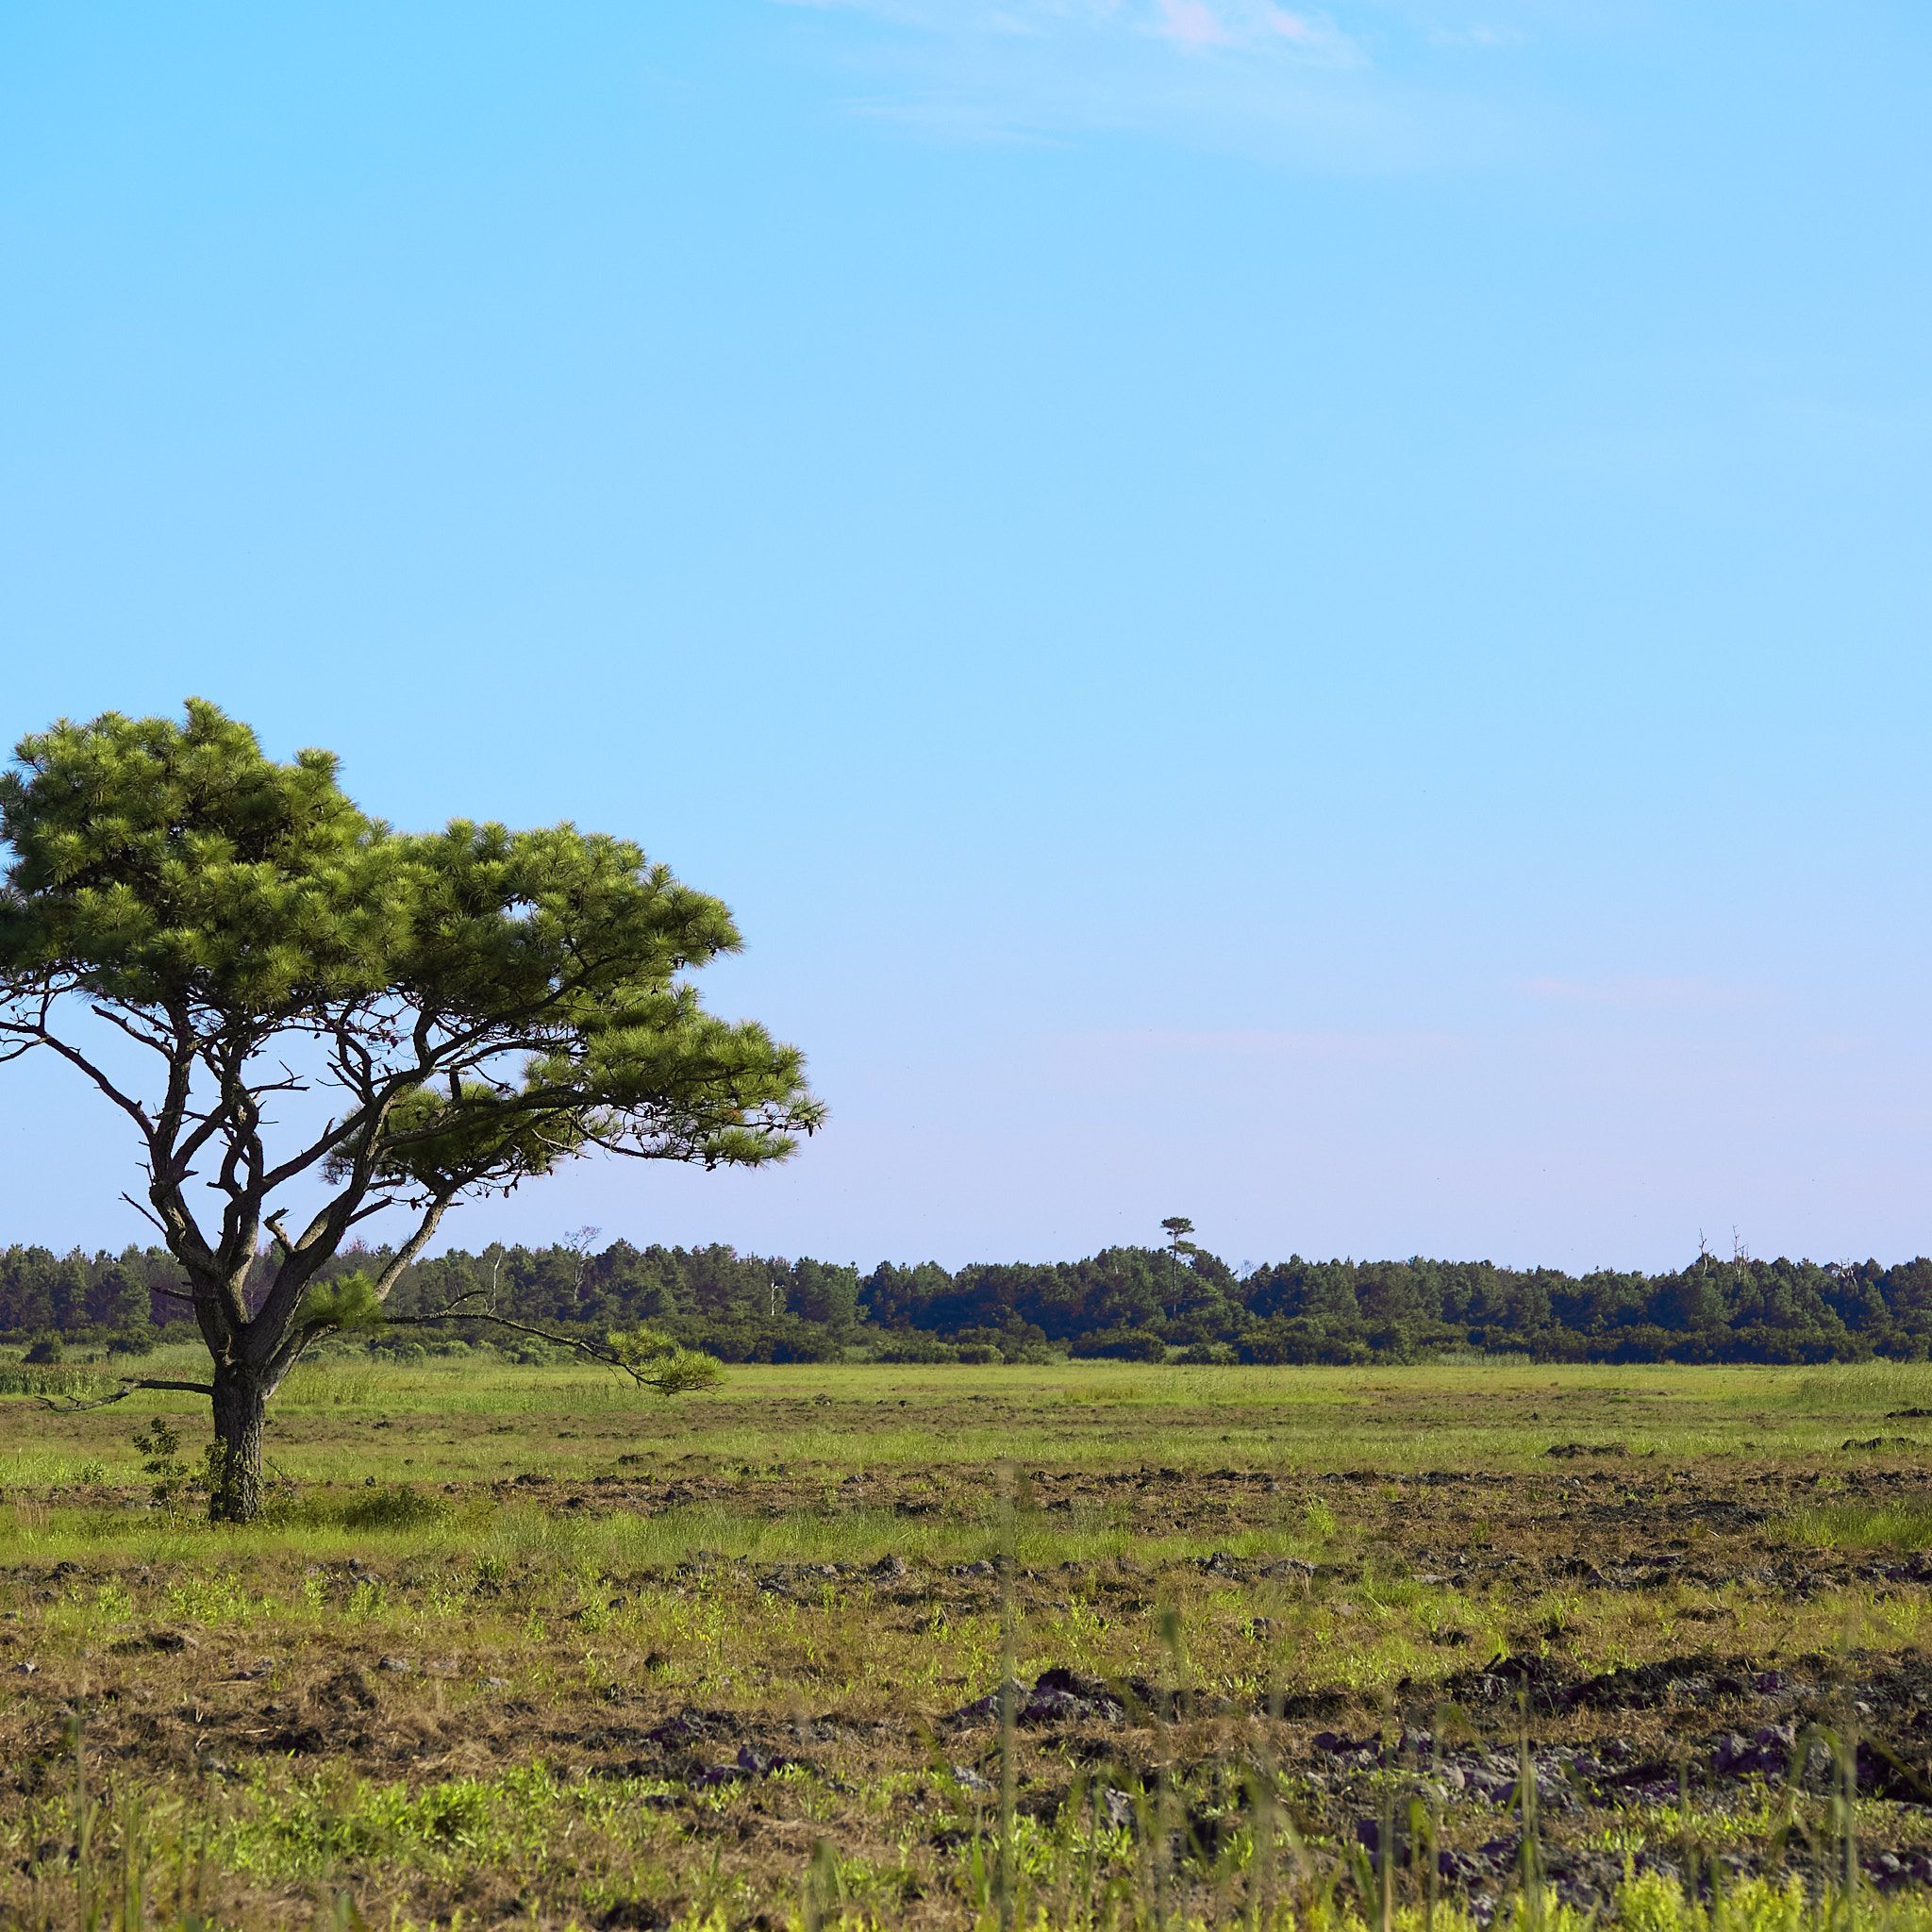 A lonely tree in a field on Assateague Island.